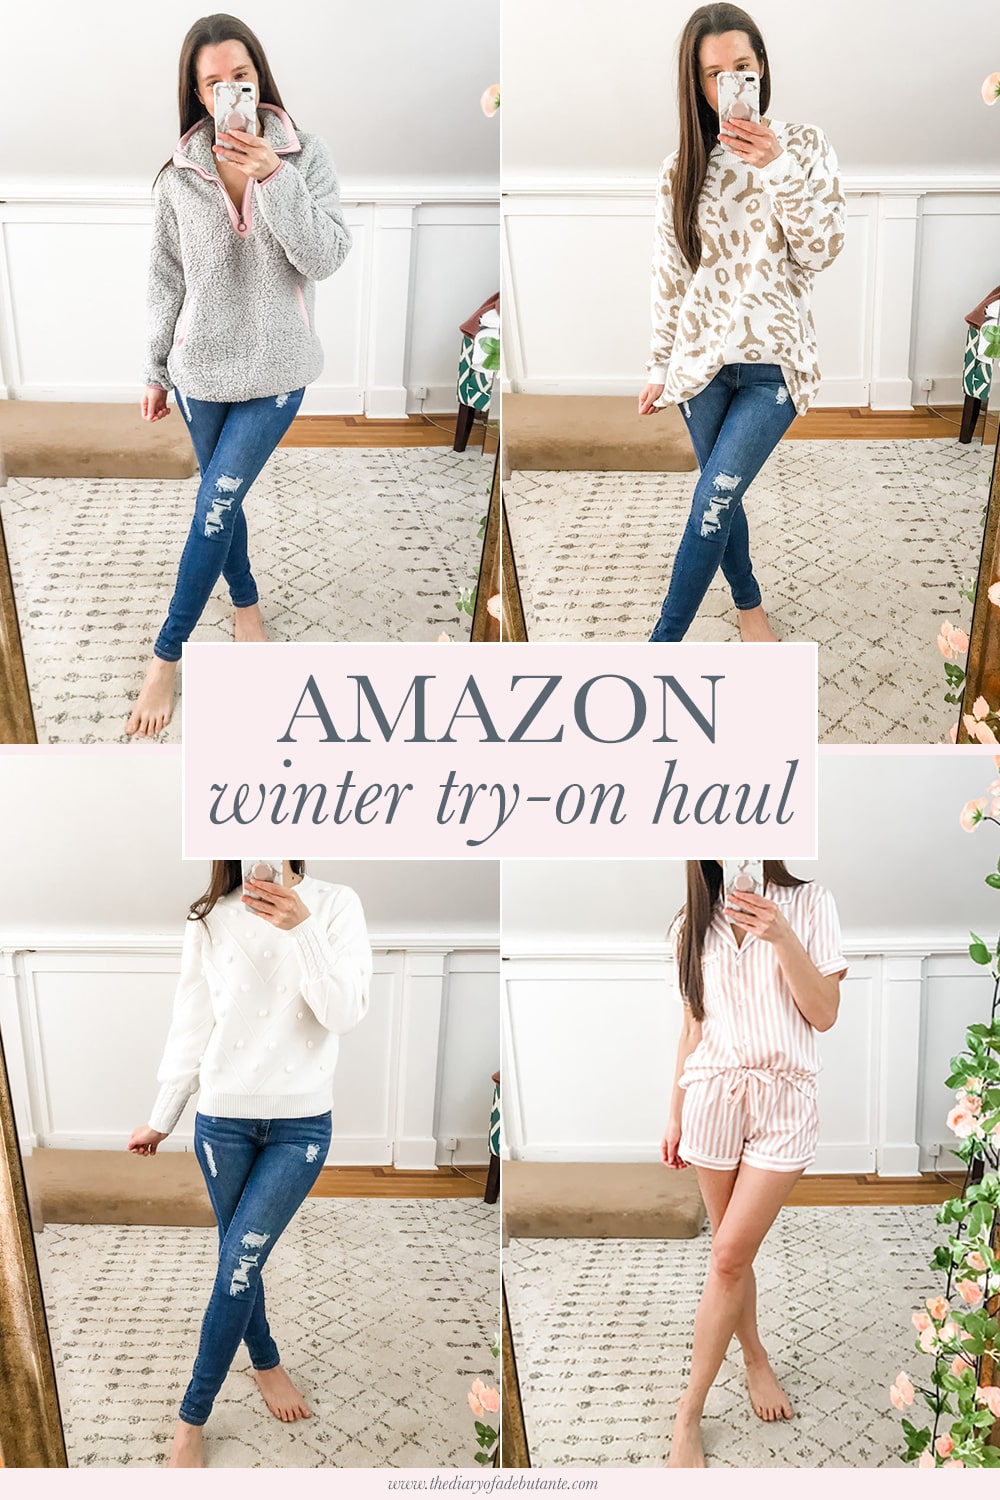 Affordable fashion blogger Stephanie Ziajka of Diary of a Debutante shares her 2020 Amazon winter try-on haul